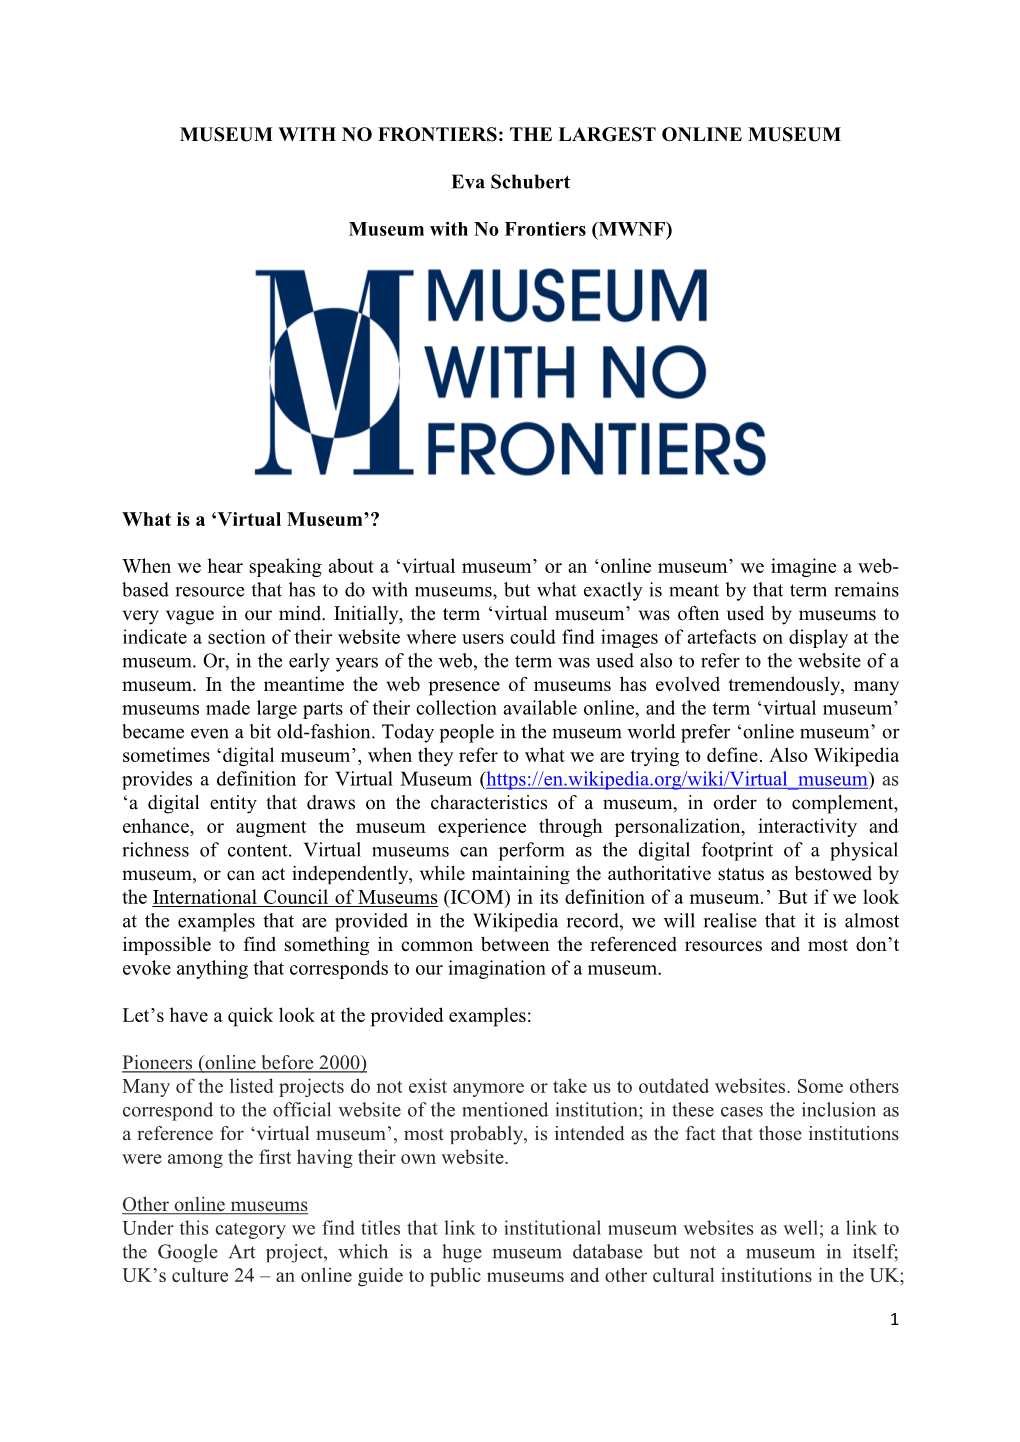 (MWNF) What Is a 'Virtual Museum'?